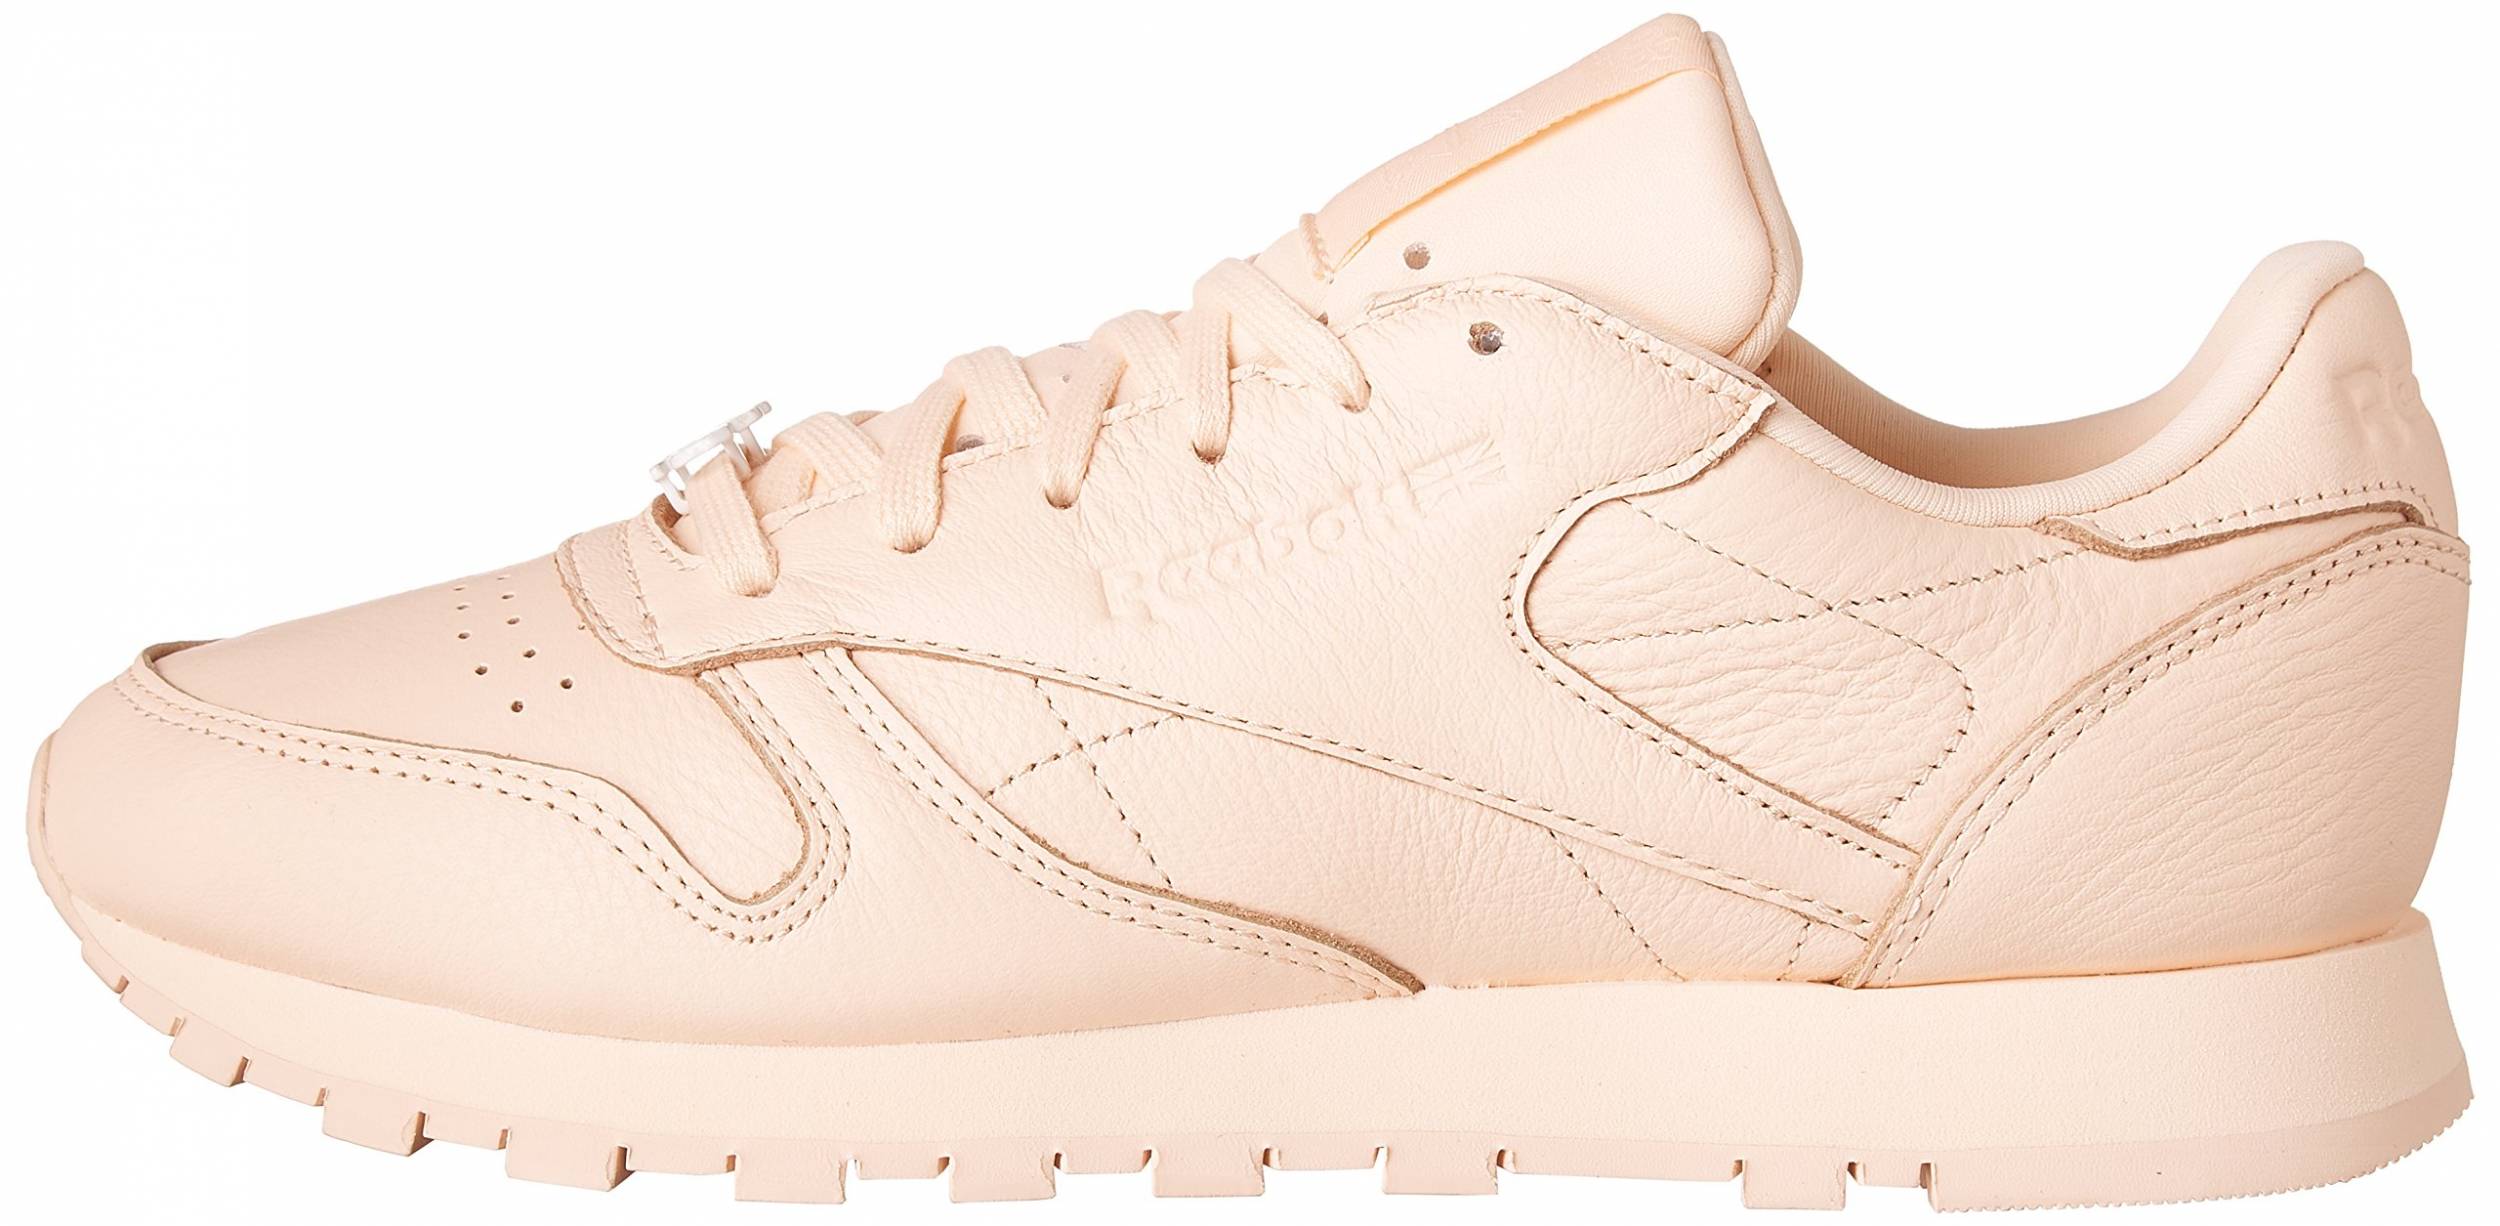 West atmosphere Shipley Reebok Classic Leather L sneakers in gold | RunRepeat